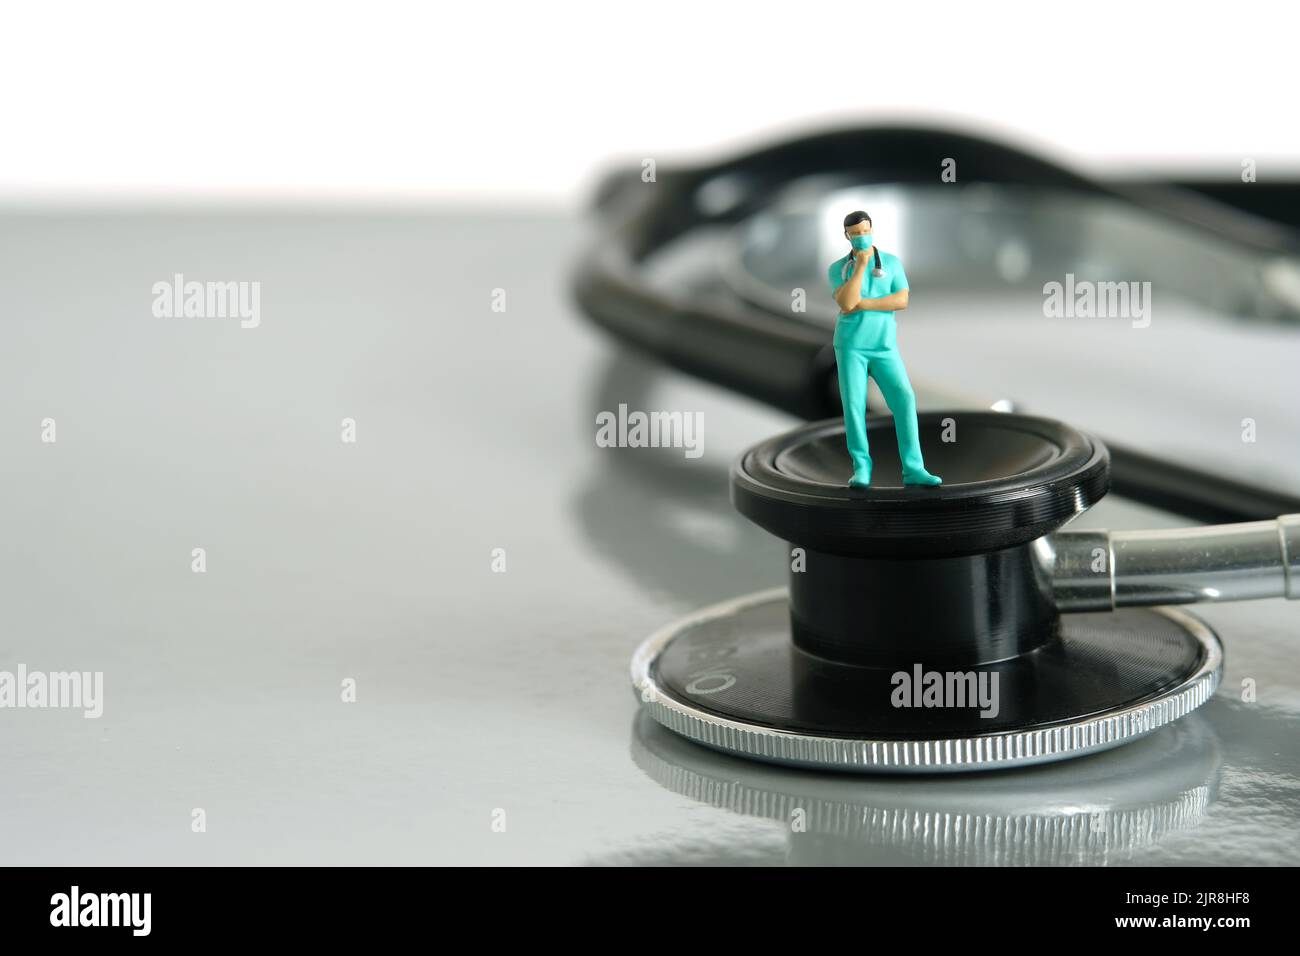 Miniature people toy figure photography. A men doctor or nurse thinking while standing above stethoscope on a desk. Image photo Stock Photo